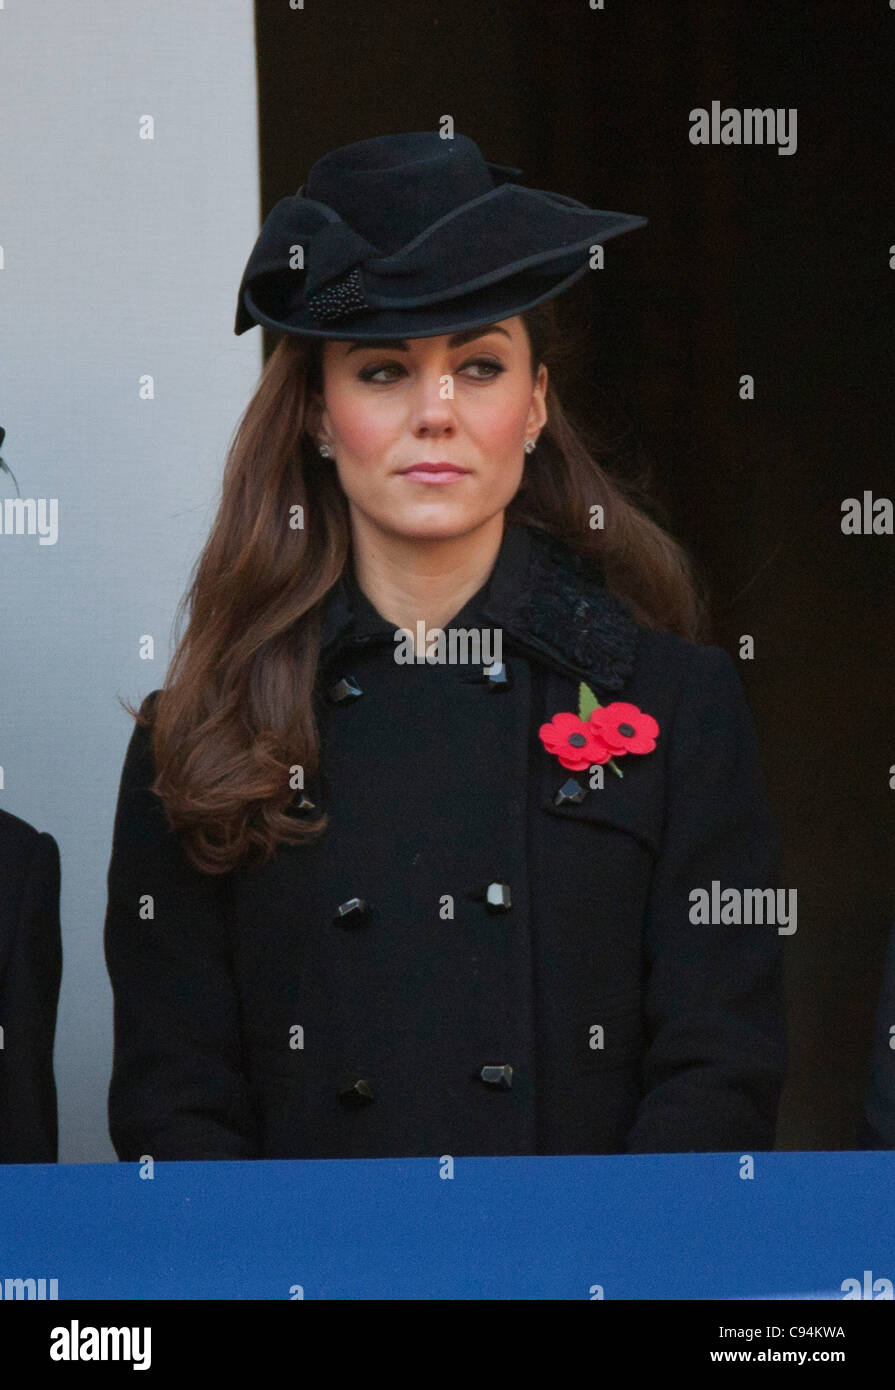 13th November 2011 London UK. Queen Elizabeth leads members of the royal family at the Remembrance Sunday service at the Cenotaph in central London. Stock Photo